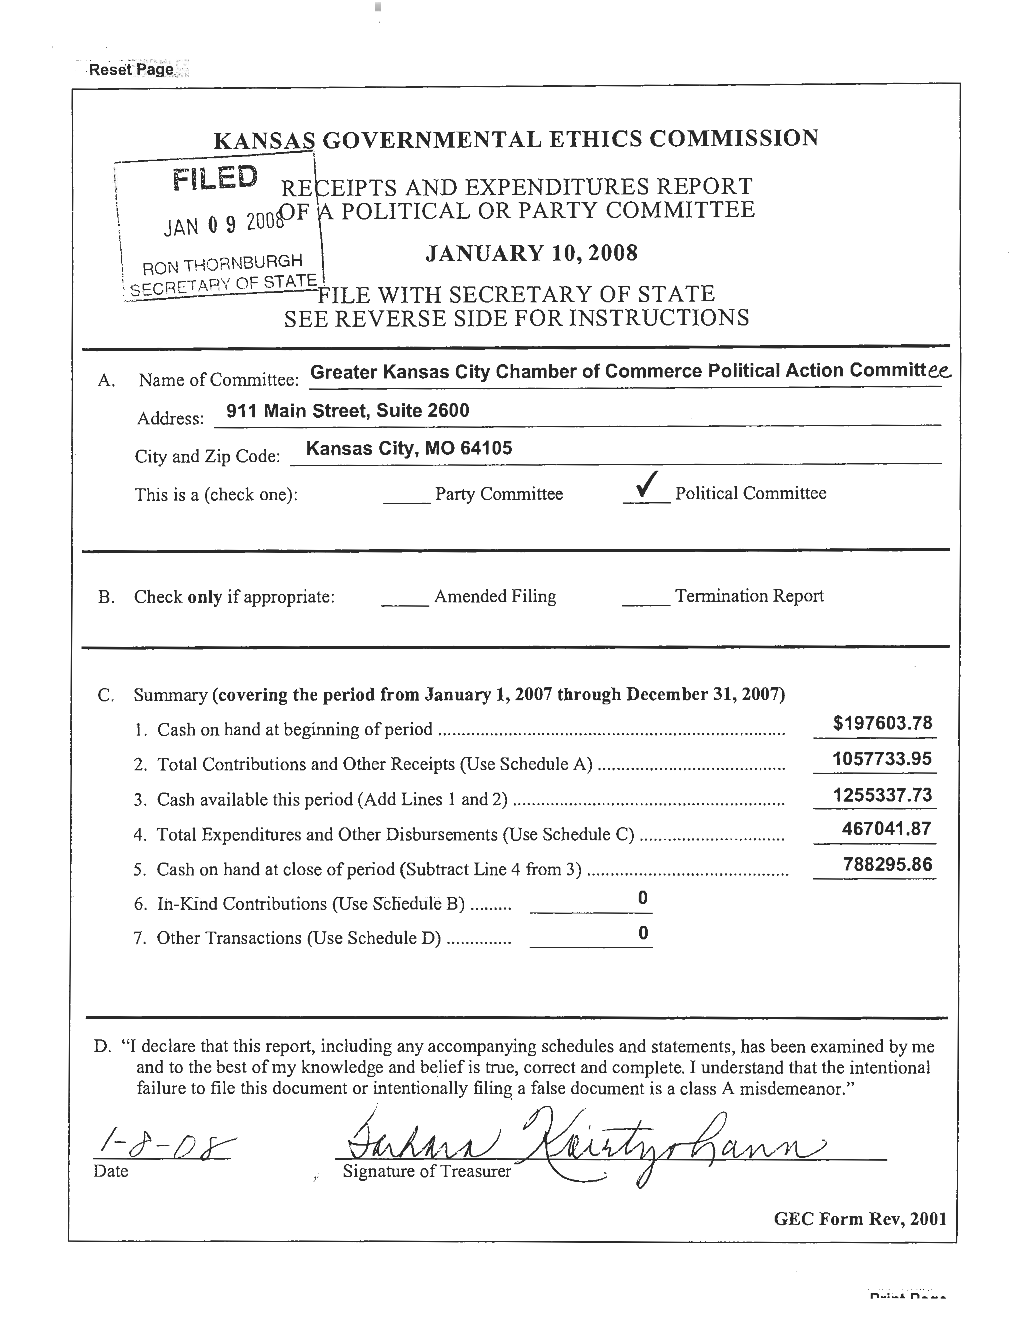 Rebeipts and EXPENDITURES REPORT JAN 200@F T4 POLITICAL OR PARTY COMMITTEE FILE with SECRET